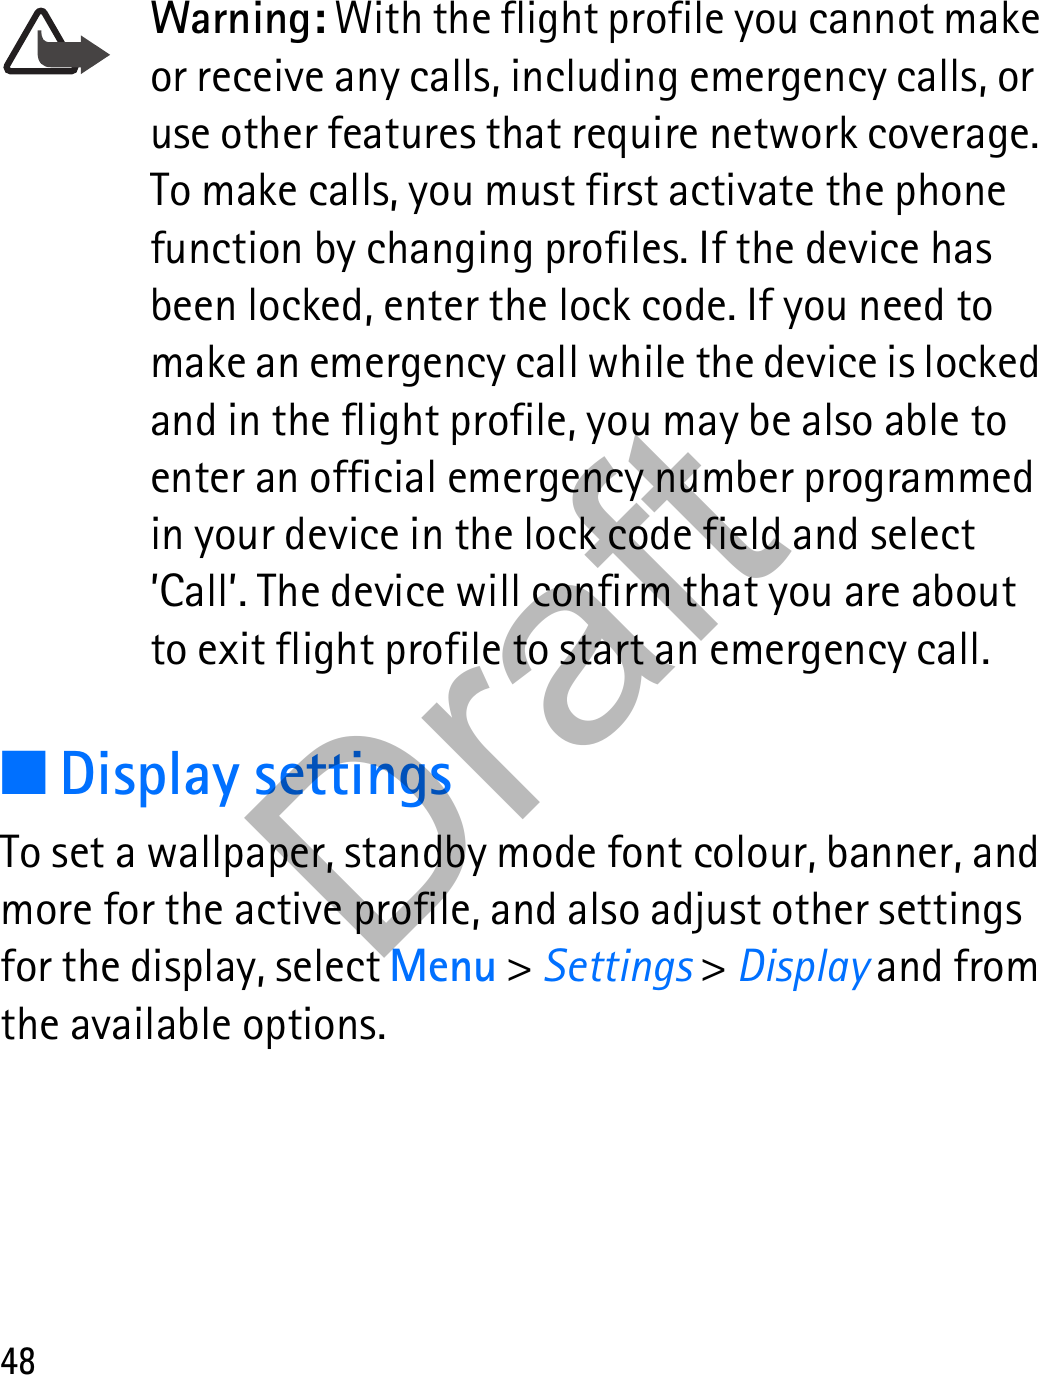 48Warning: With the flight profile you cannot make or receive any calls, including emergency calls, or use other features that require network coverage. To make calls, you must first activate the phone function by changing profiles. If the device has been locked, enter the lock code. If you need to make an emergency call while the device is locked and in the flight profile, you may be also able to enter an official emergency number programmed in your device in the lock code field and select ’Call’. The device will confirm that you are about to exit flight profile to start an emergency call.■Display settingsTo set a wallpaper, standby mode font colour, banner, and more for the active profile, and also adjust other settings for the display, select Menu &gt; Settings &gt; Display and from the available options.Draft